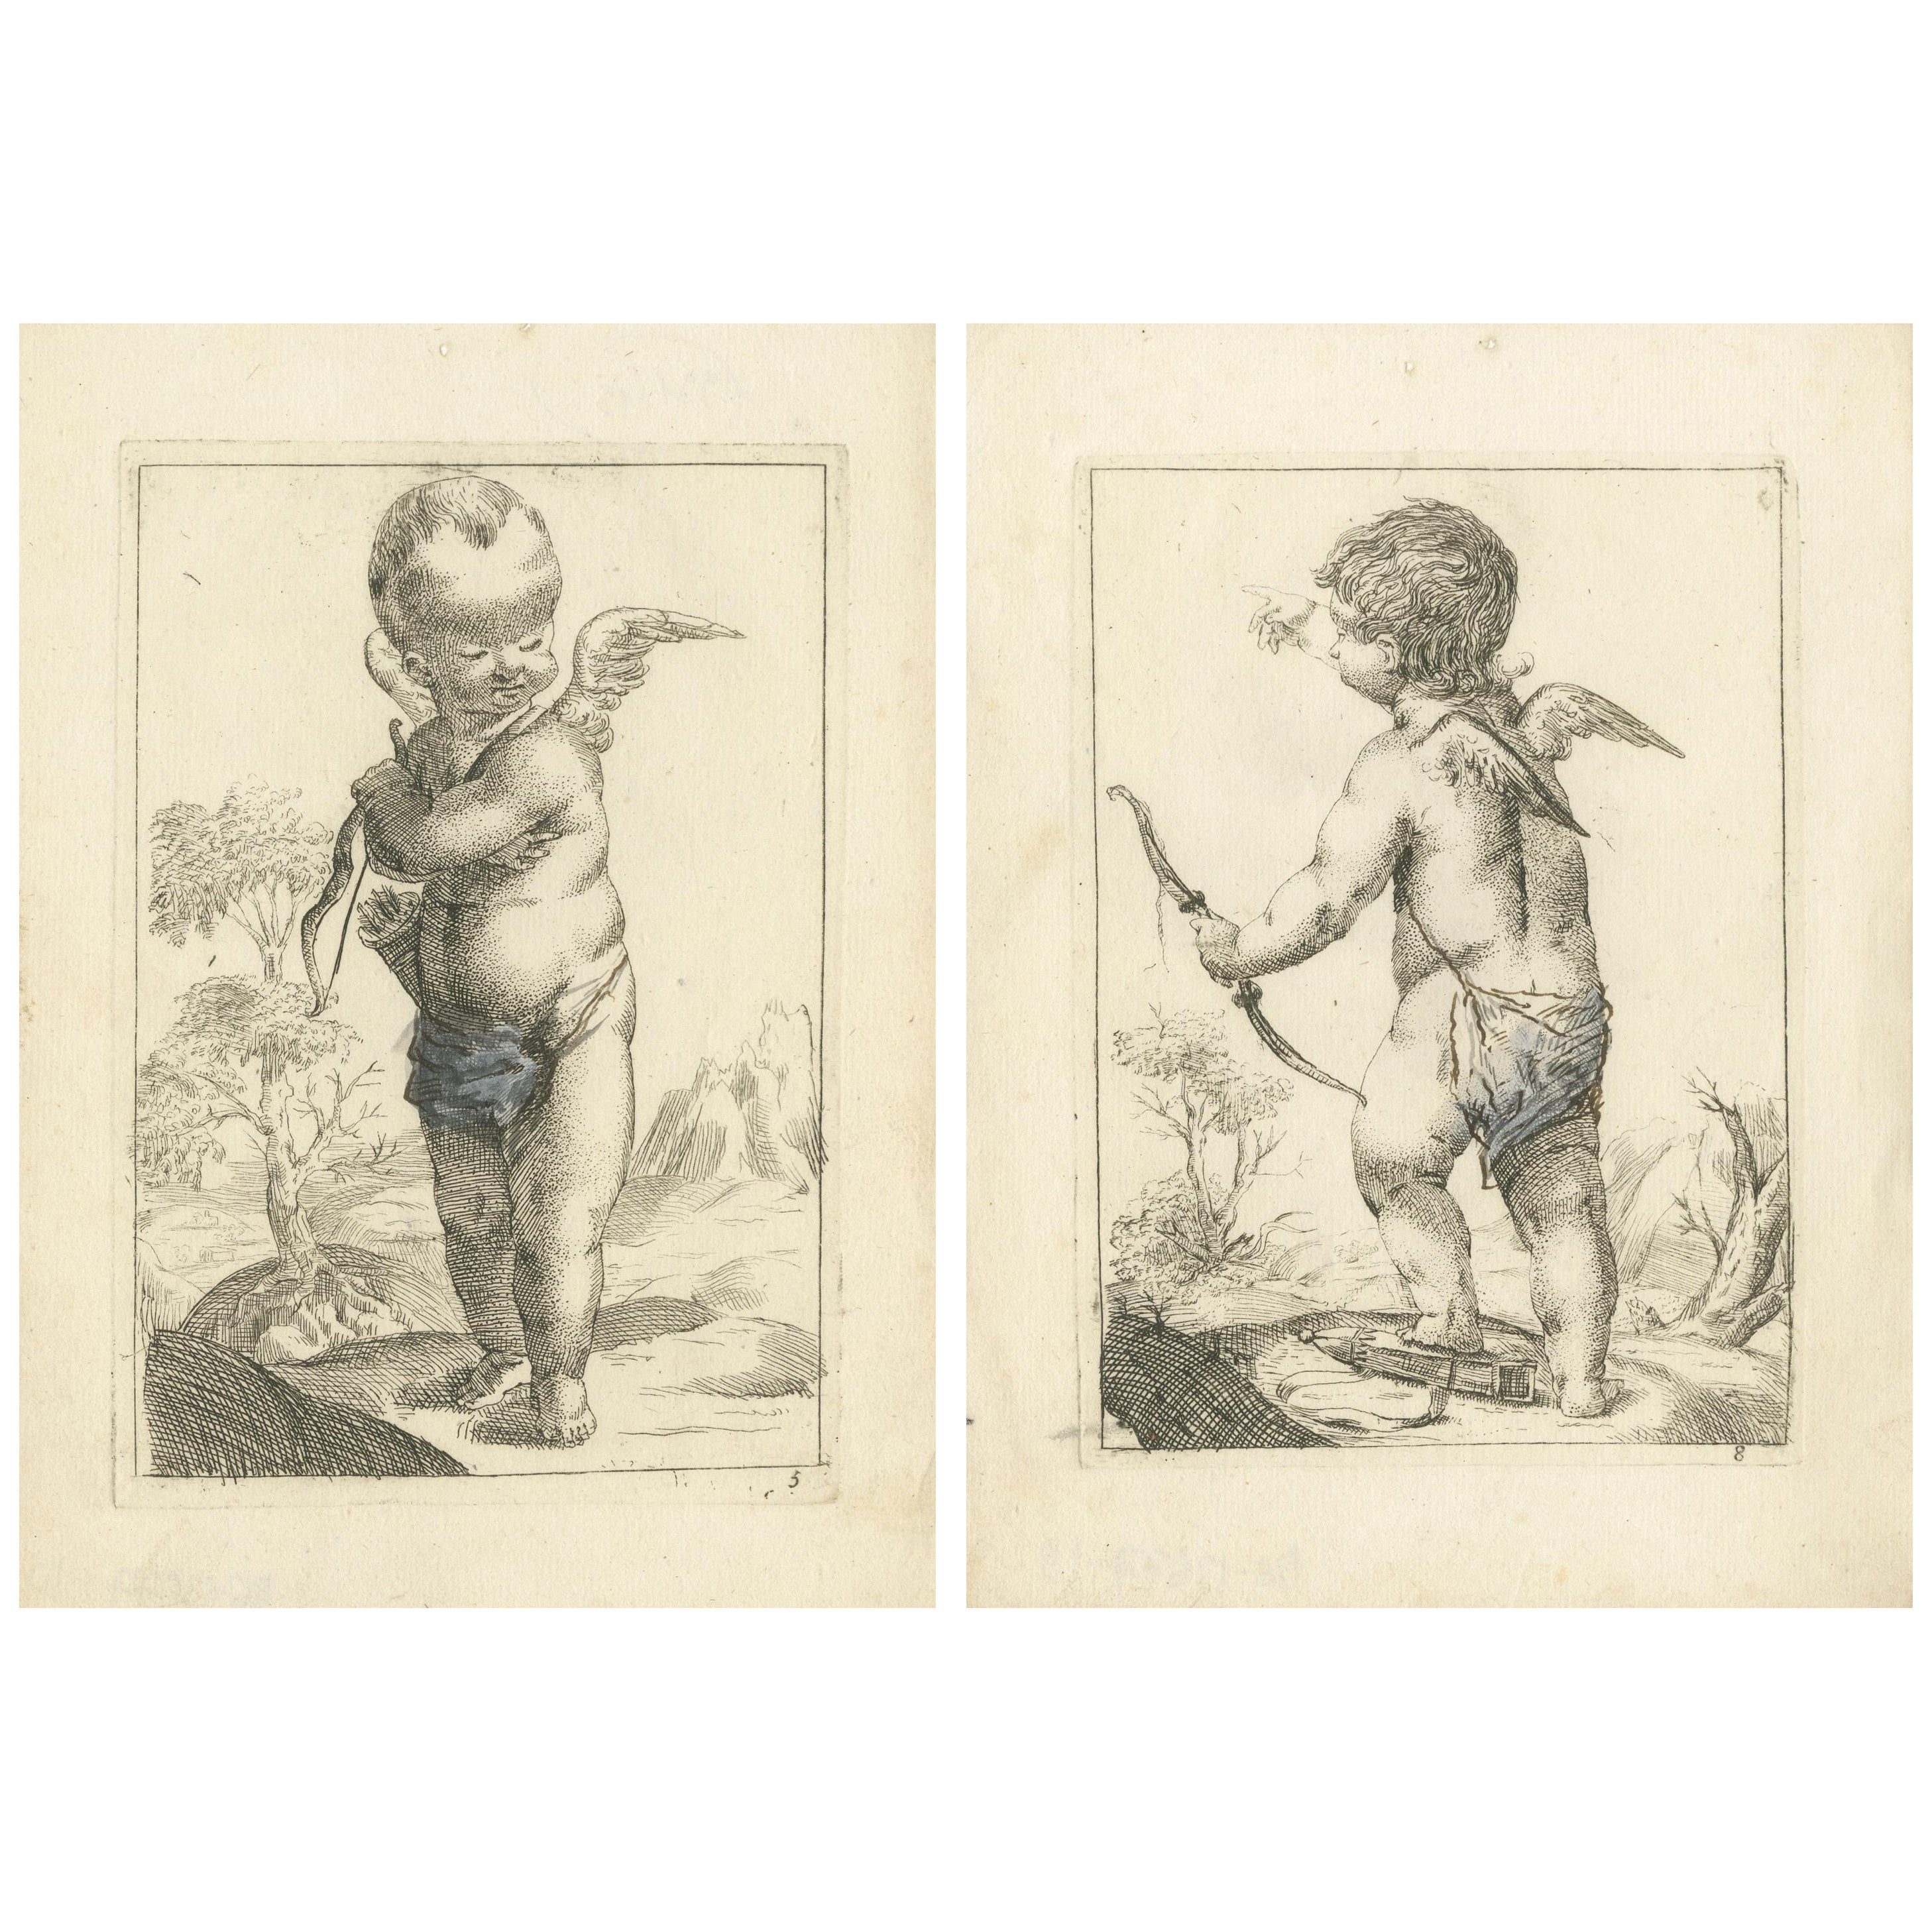 Whimsical Archers: Duo of Baroque Putti, circa 1620